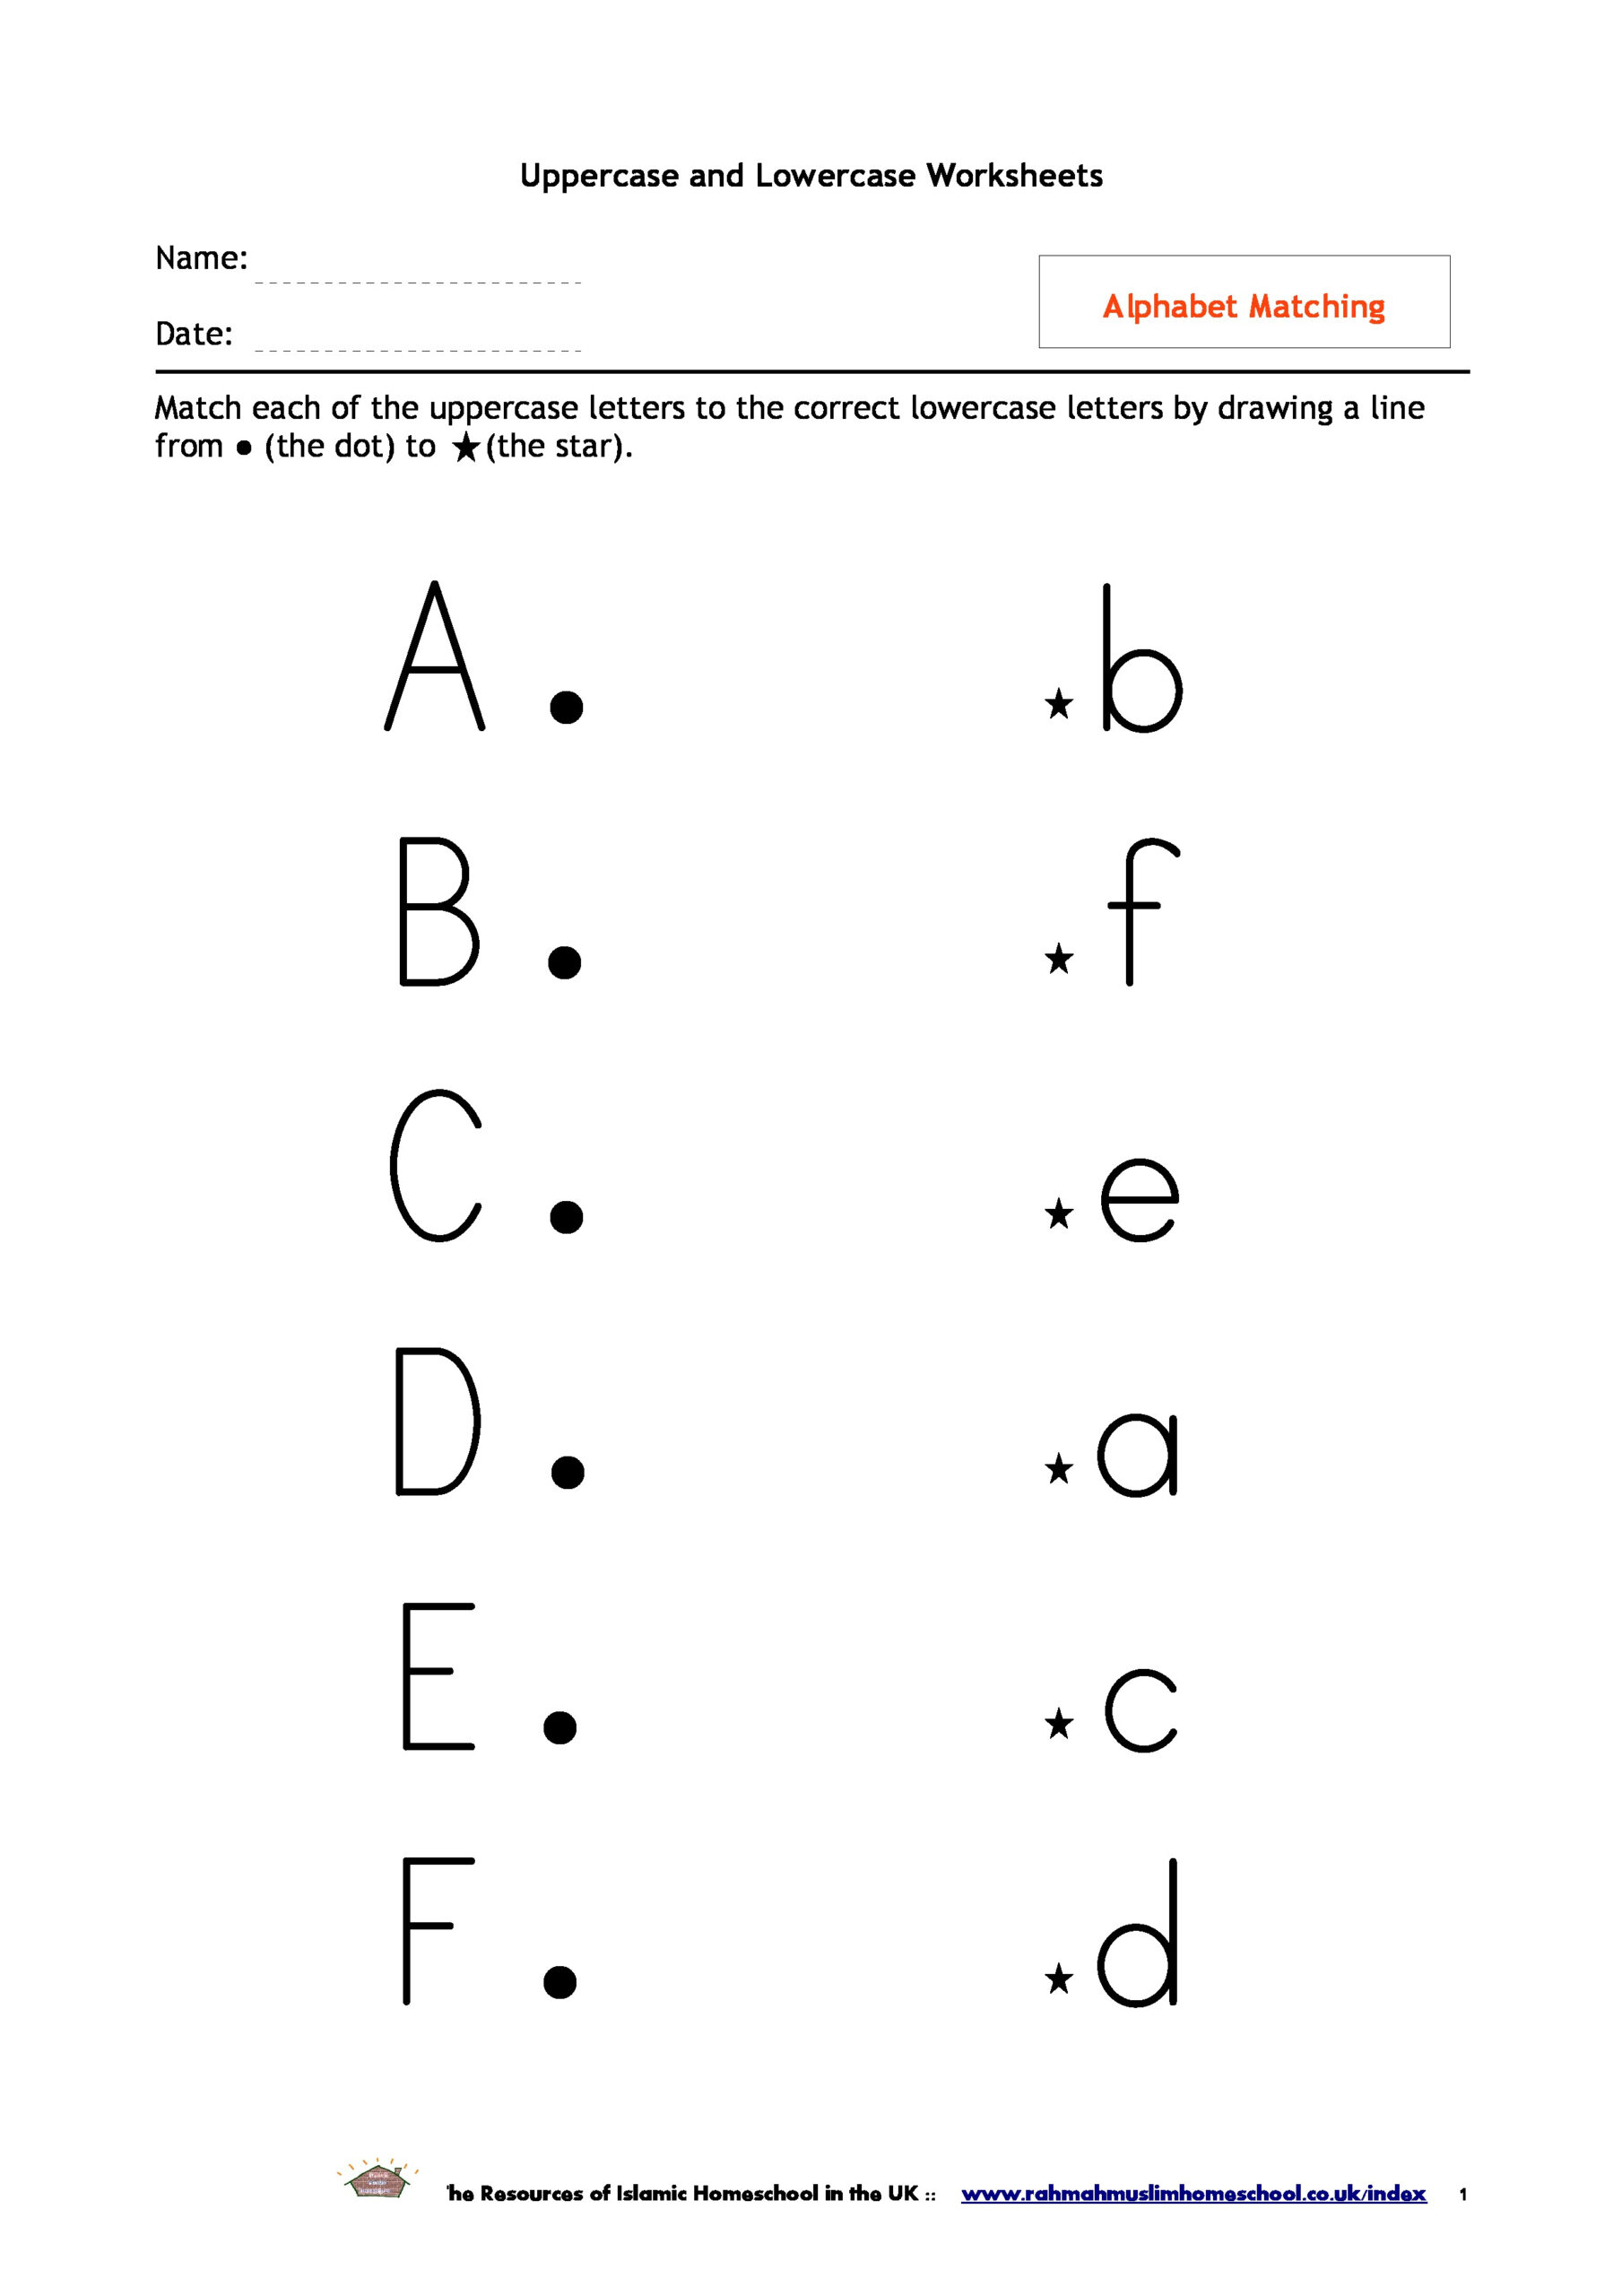 Alphabet Matching Worksheets | The Resources Of Islamic throughout Letter Matching Worksheets